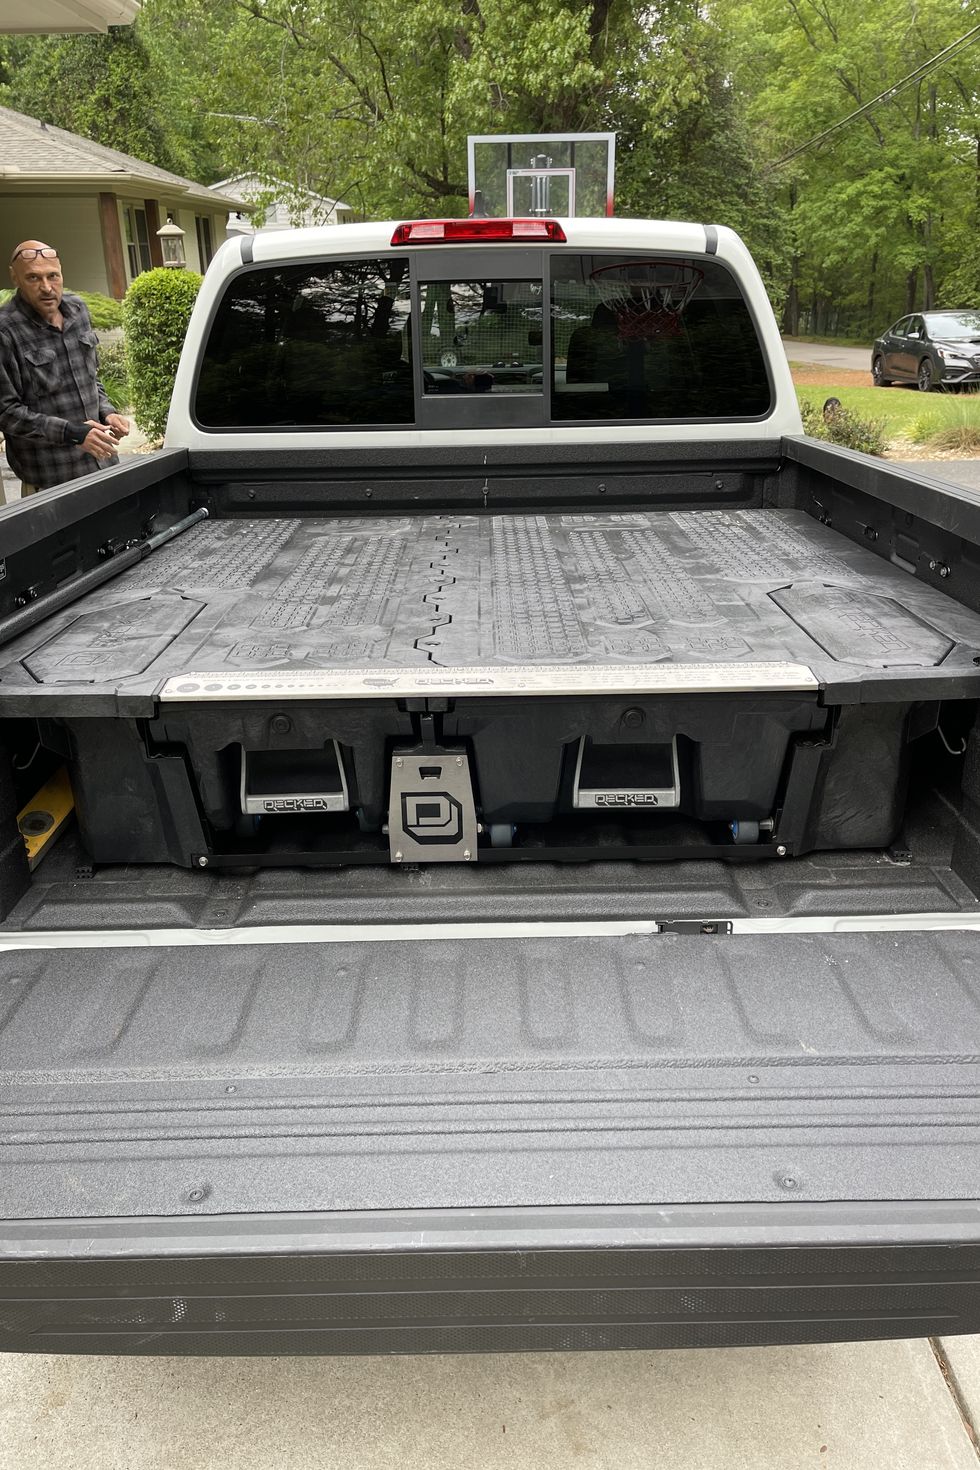 This Pickup Truck Gear Creates a Truly Mobile Office